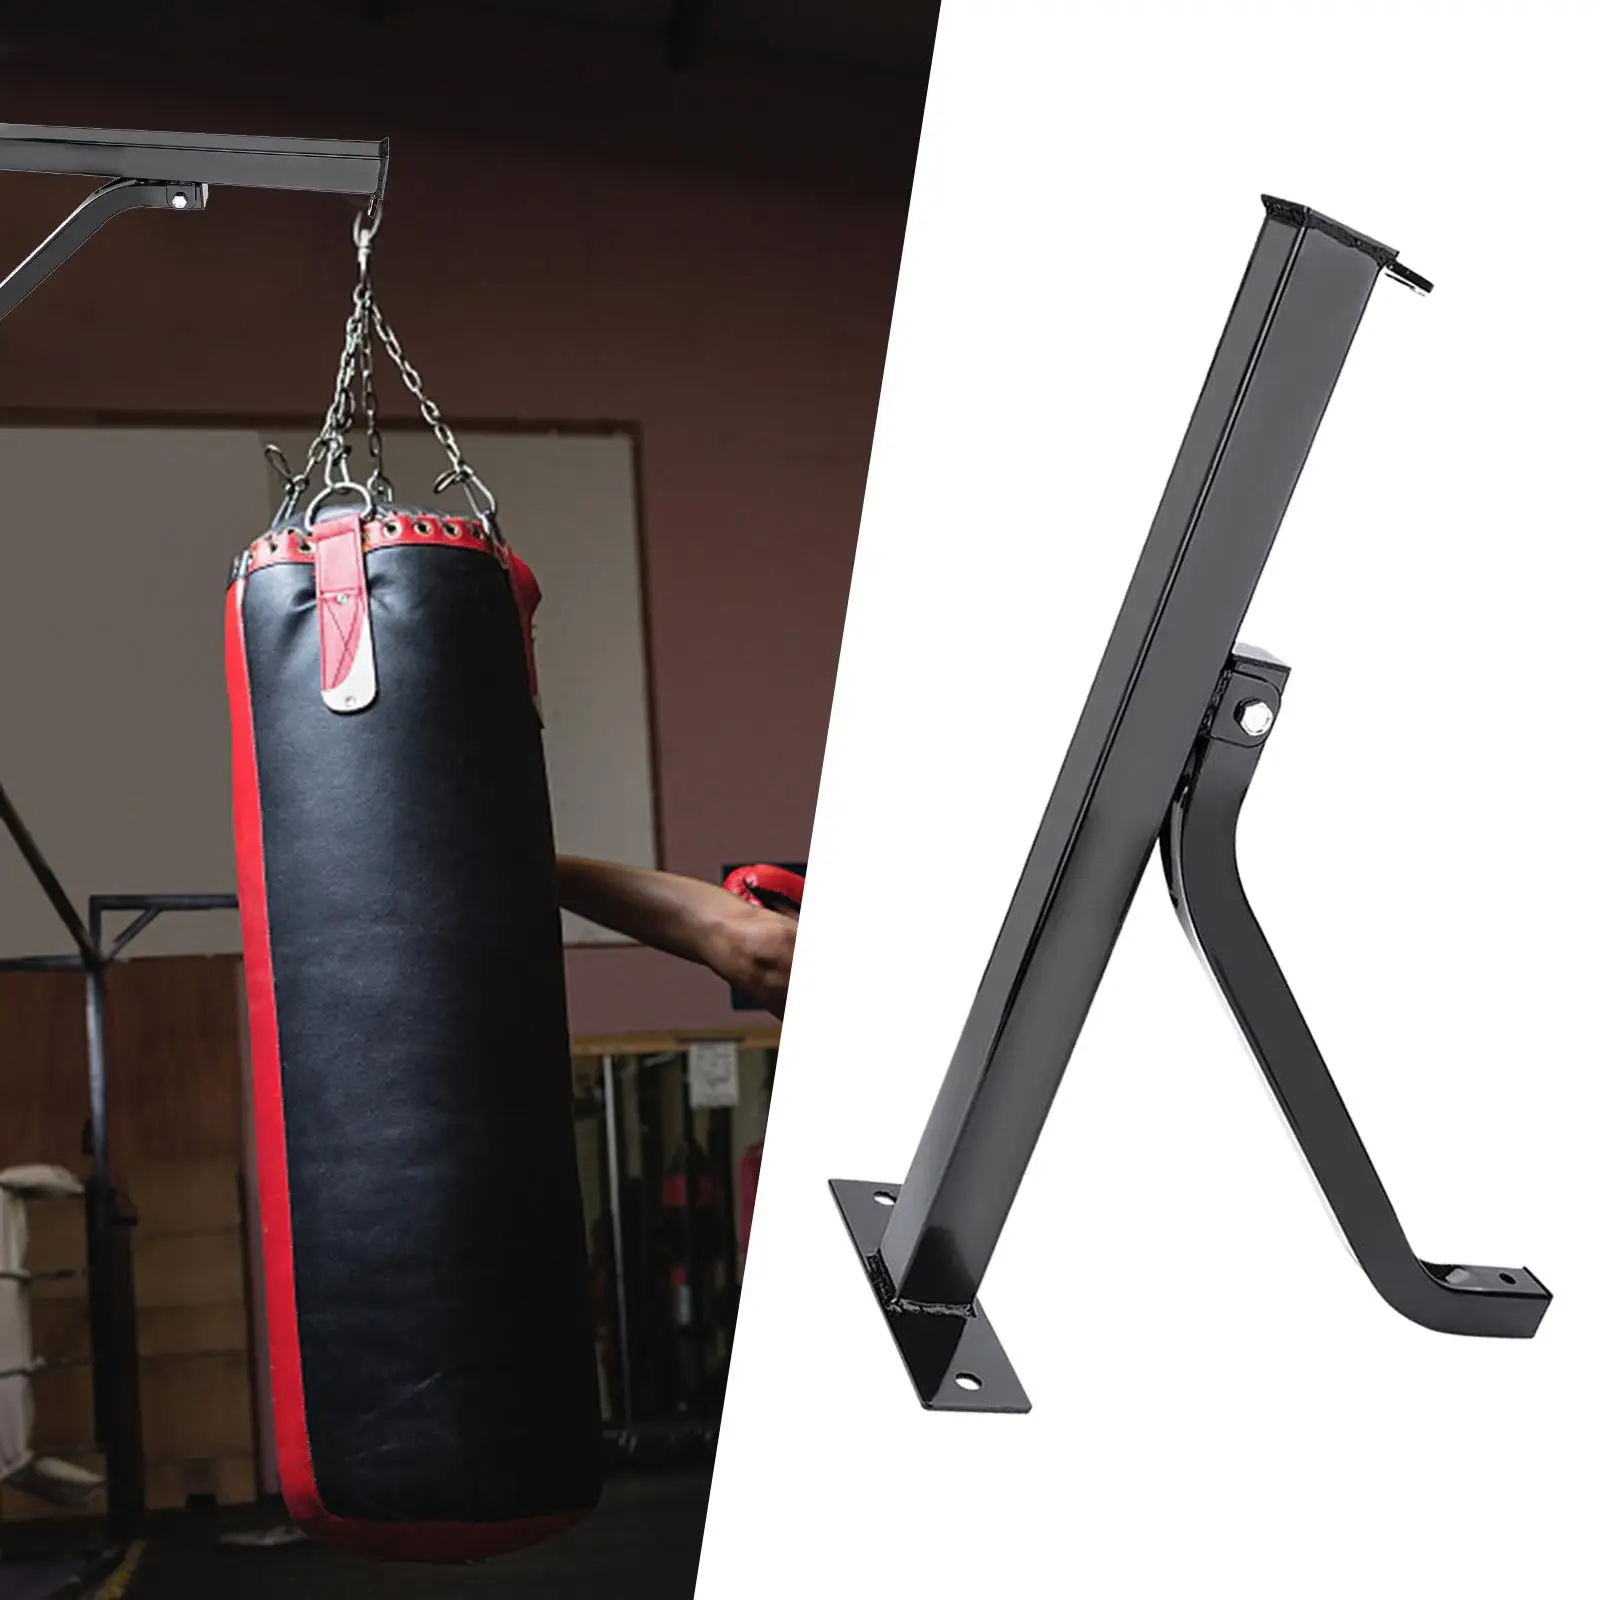 Wall Mount Heavy Bag Hanger Punching Bag Mounting Bracket Boxing Bag Stand Holder Heavy Duty Punching Bag Hanger for Accessories